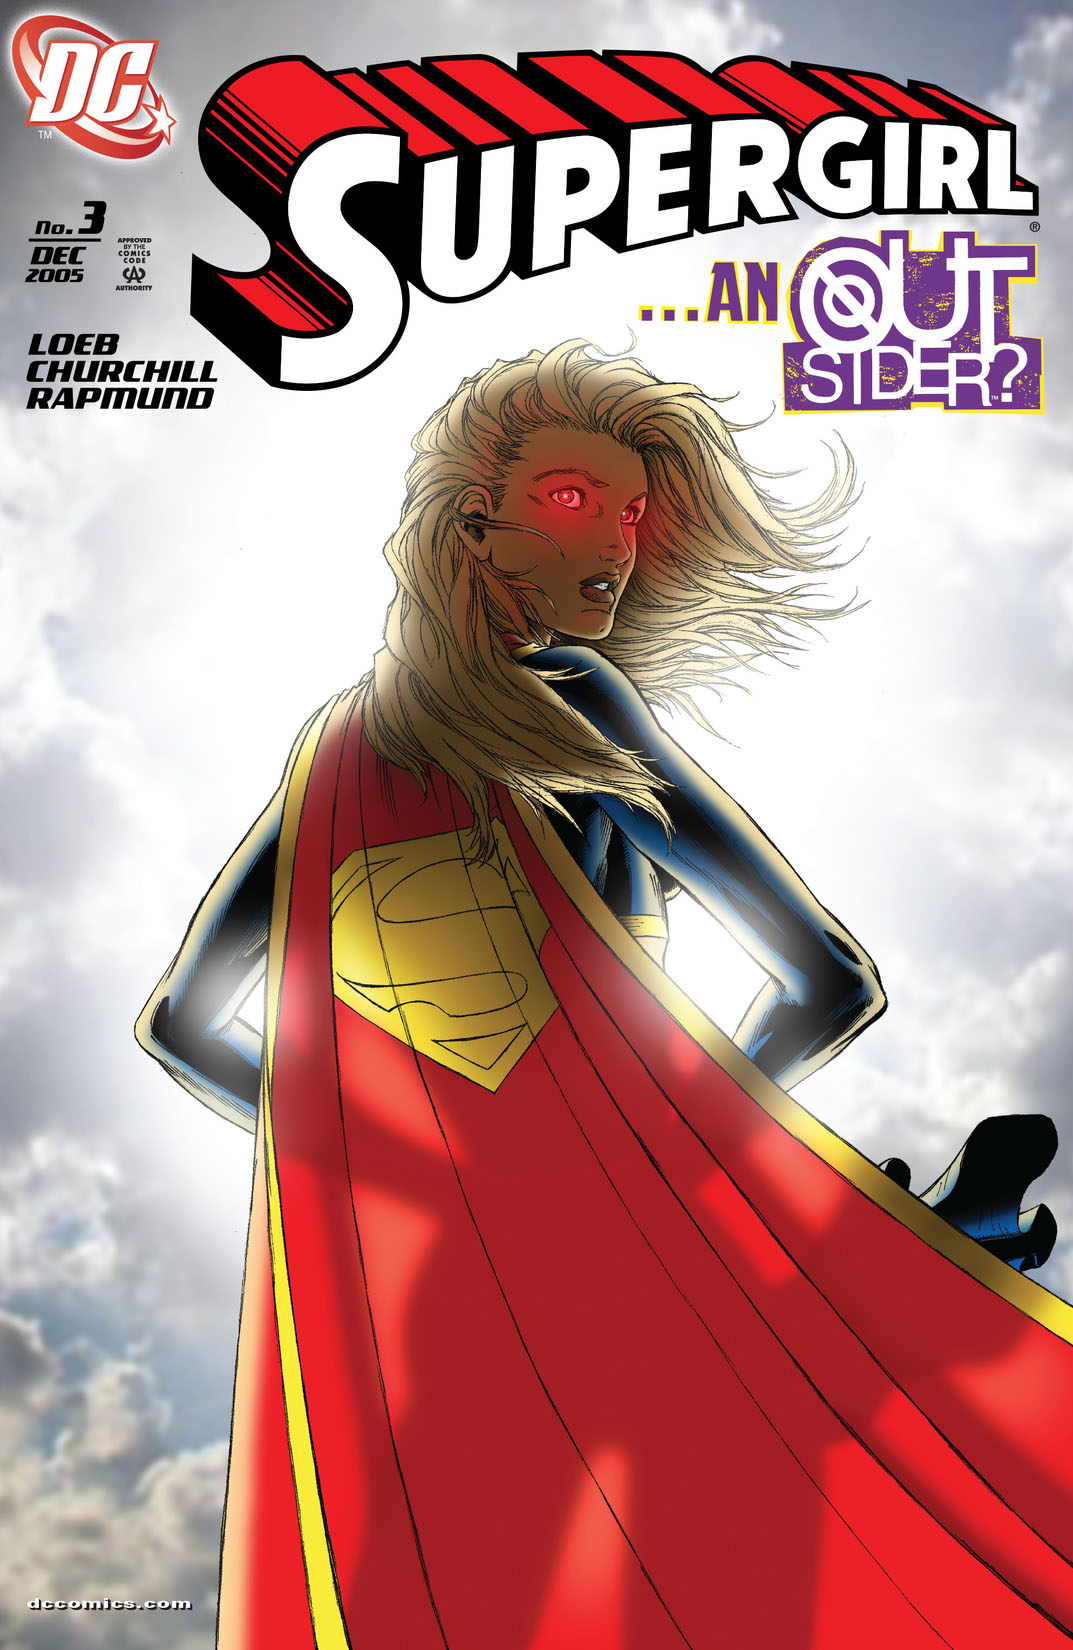 Supergirl (2005-) #3 preview images